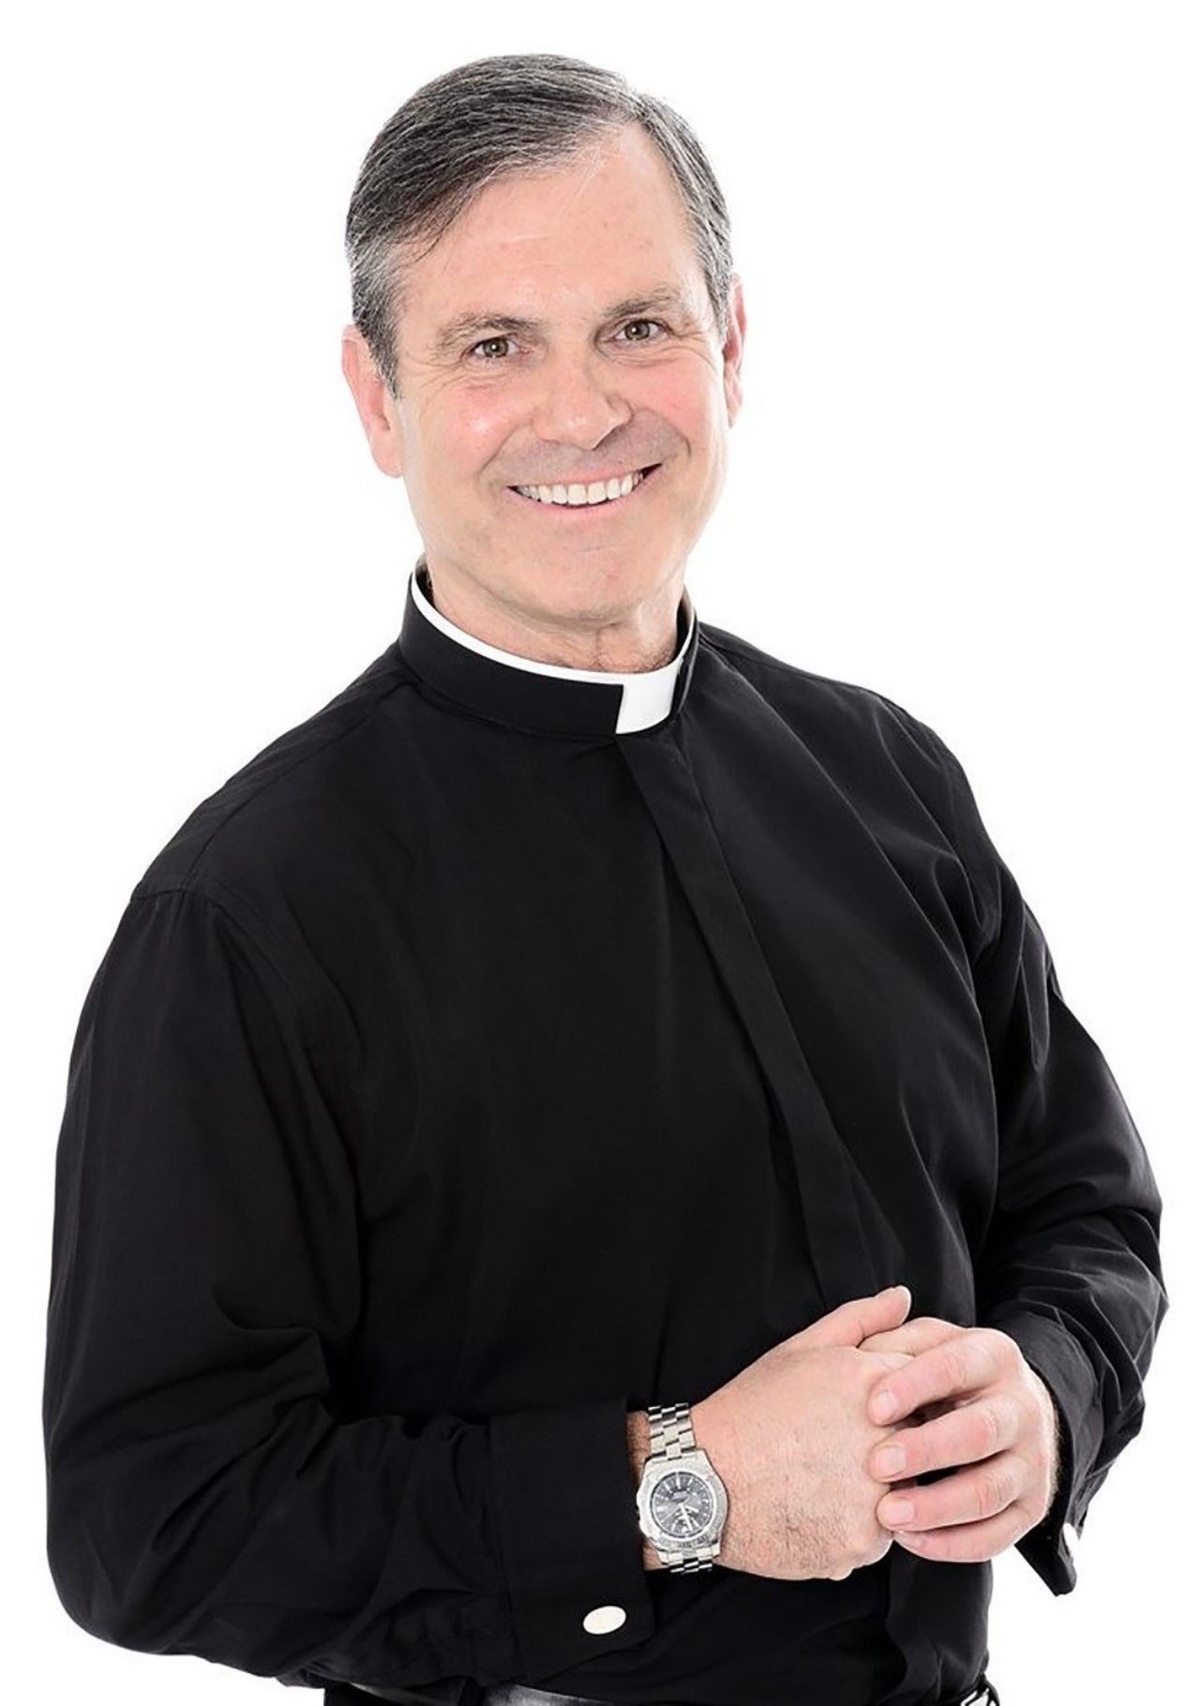 The Ultimate Guide to Shopping for Clergy Shirts for Men